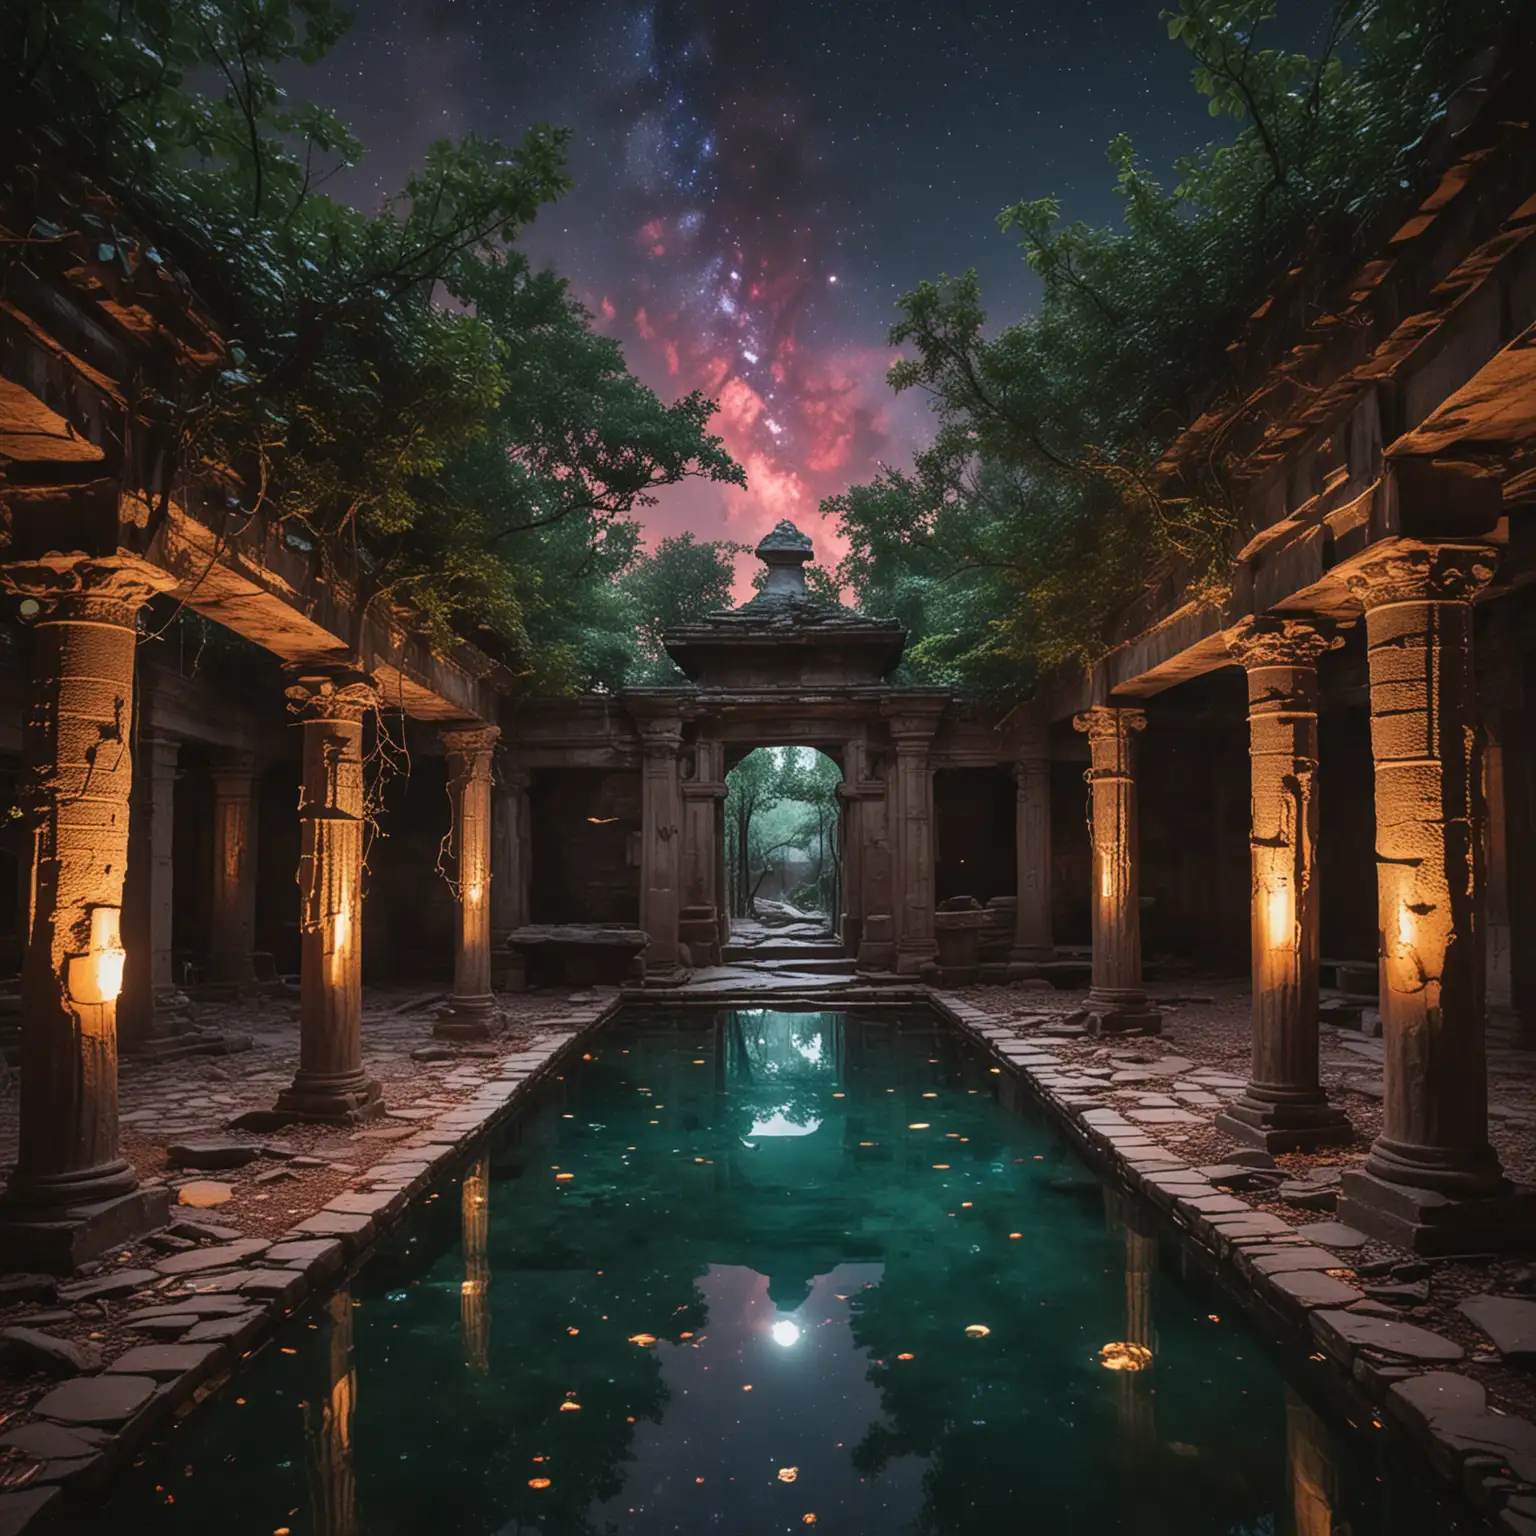 In the forest, there is an old ruined temple that houses an ancient courtyard. Within this courtyard, there is a pool of water. Emerging from the pool is a fetus enclosed in a glowing placenta. The umbilical cord connecting the placenta to the sky is visible. It's nighttime, and the sky is above them.
